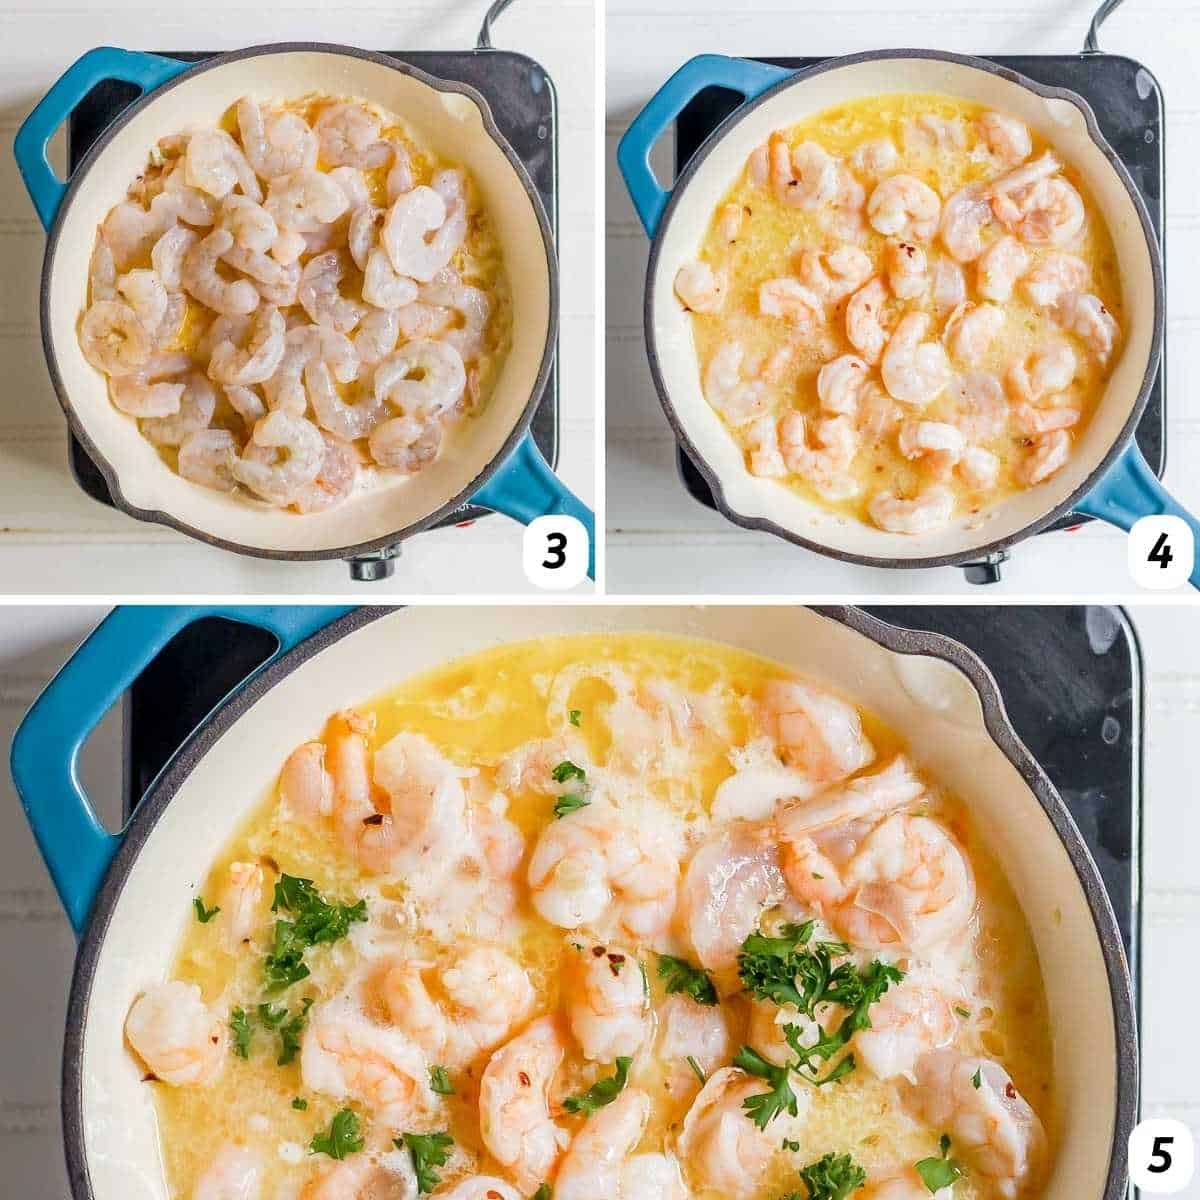 Three panel grid of process shots 3-5 - adding shrimp to skillet and adding the rest of the ingredients.